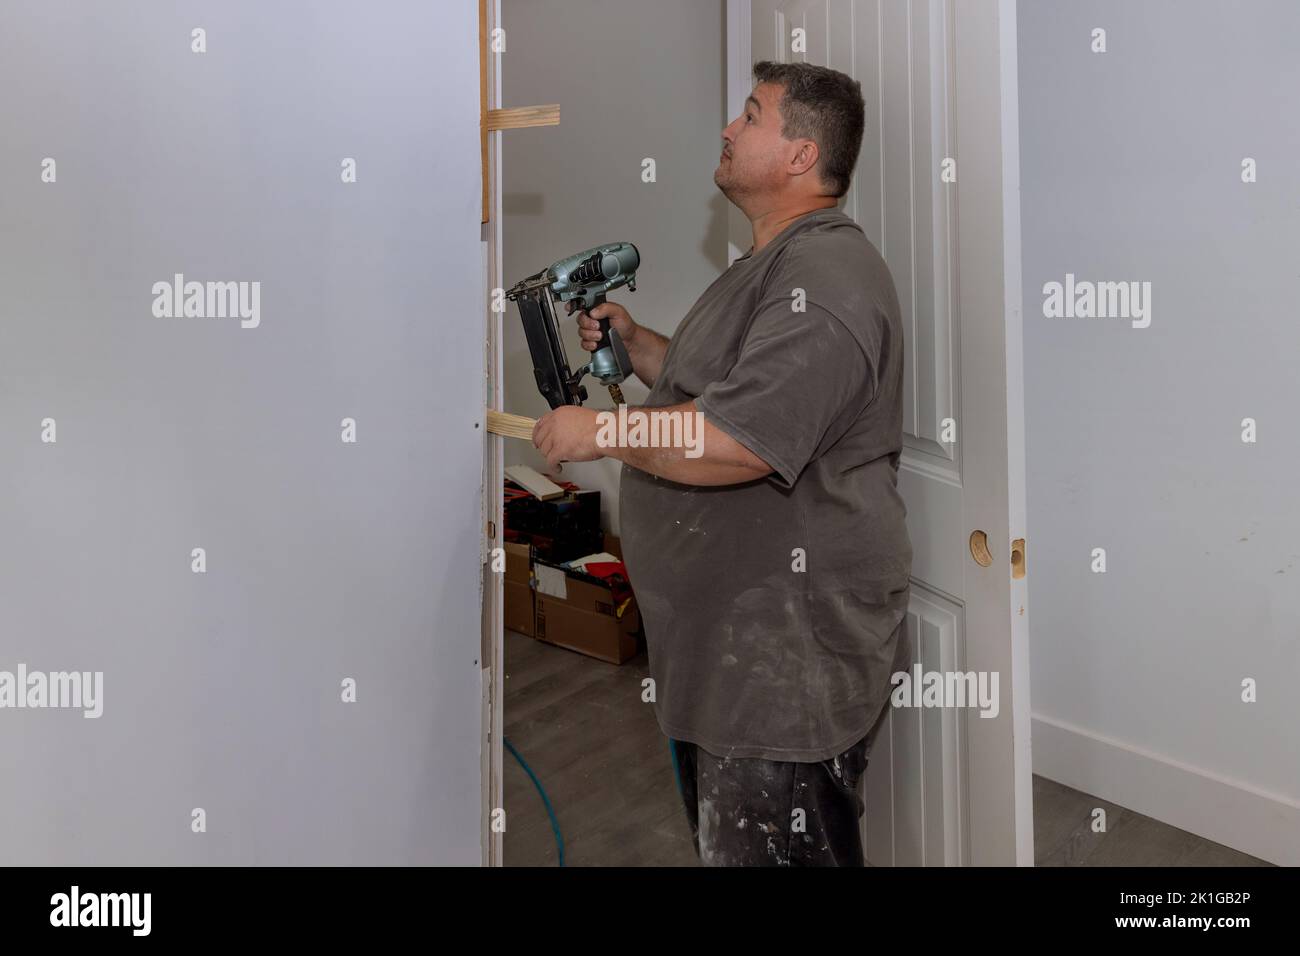 The interior doors of a new house are being installed by a carpenter trim worker Stock Photo